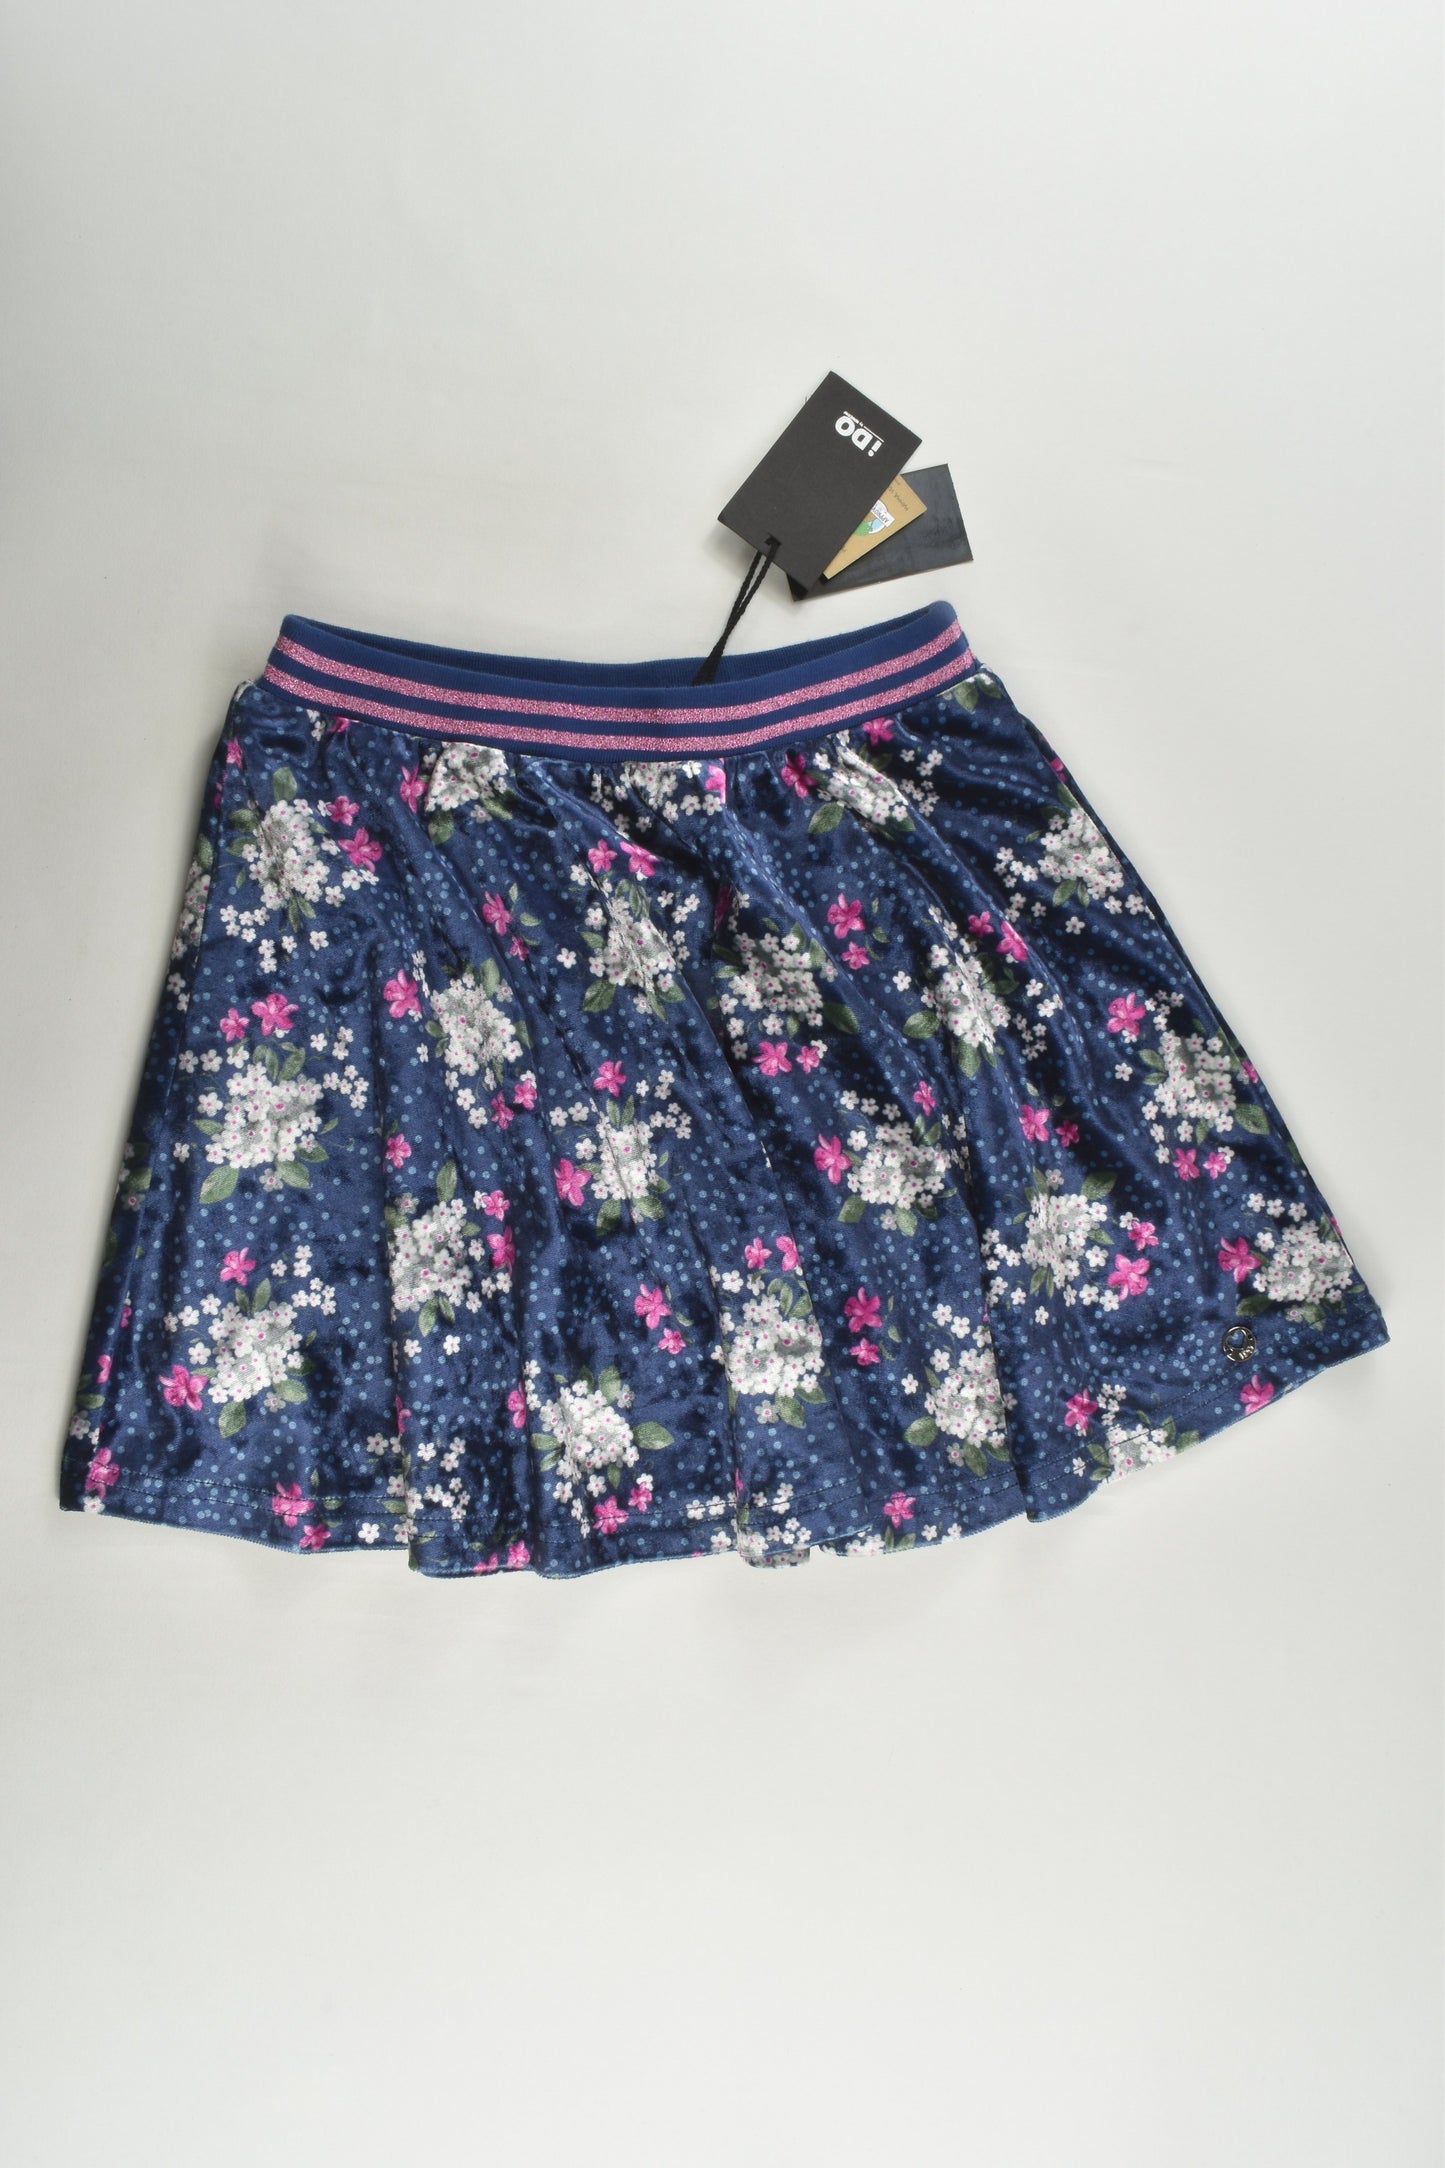 NEW iDo by Miniconf Size 7 (122 cm) Lined Floral Velvety Skirt